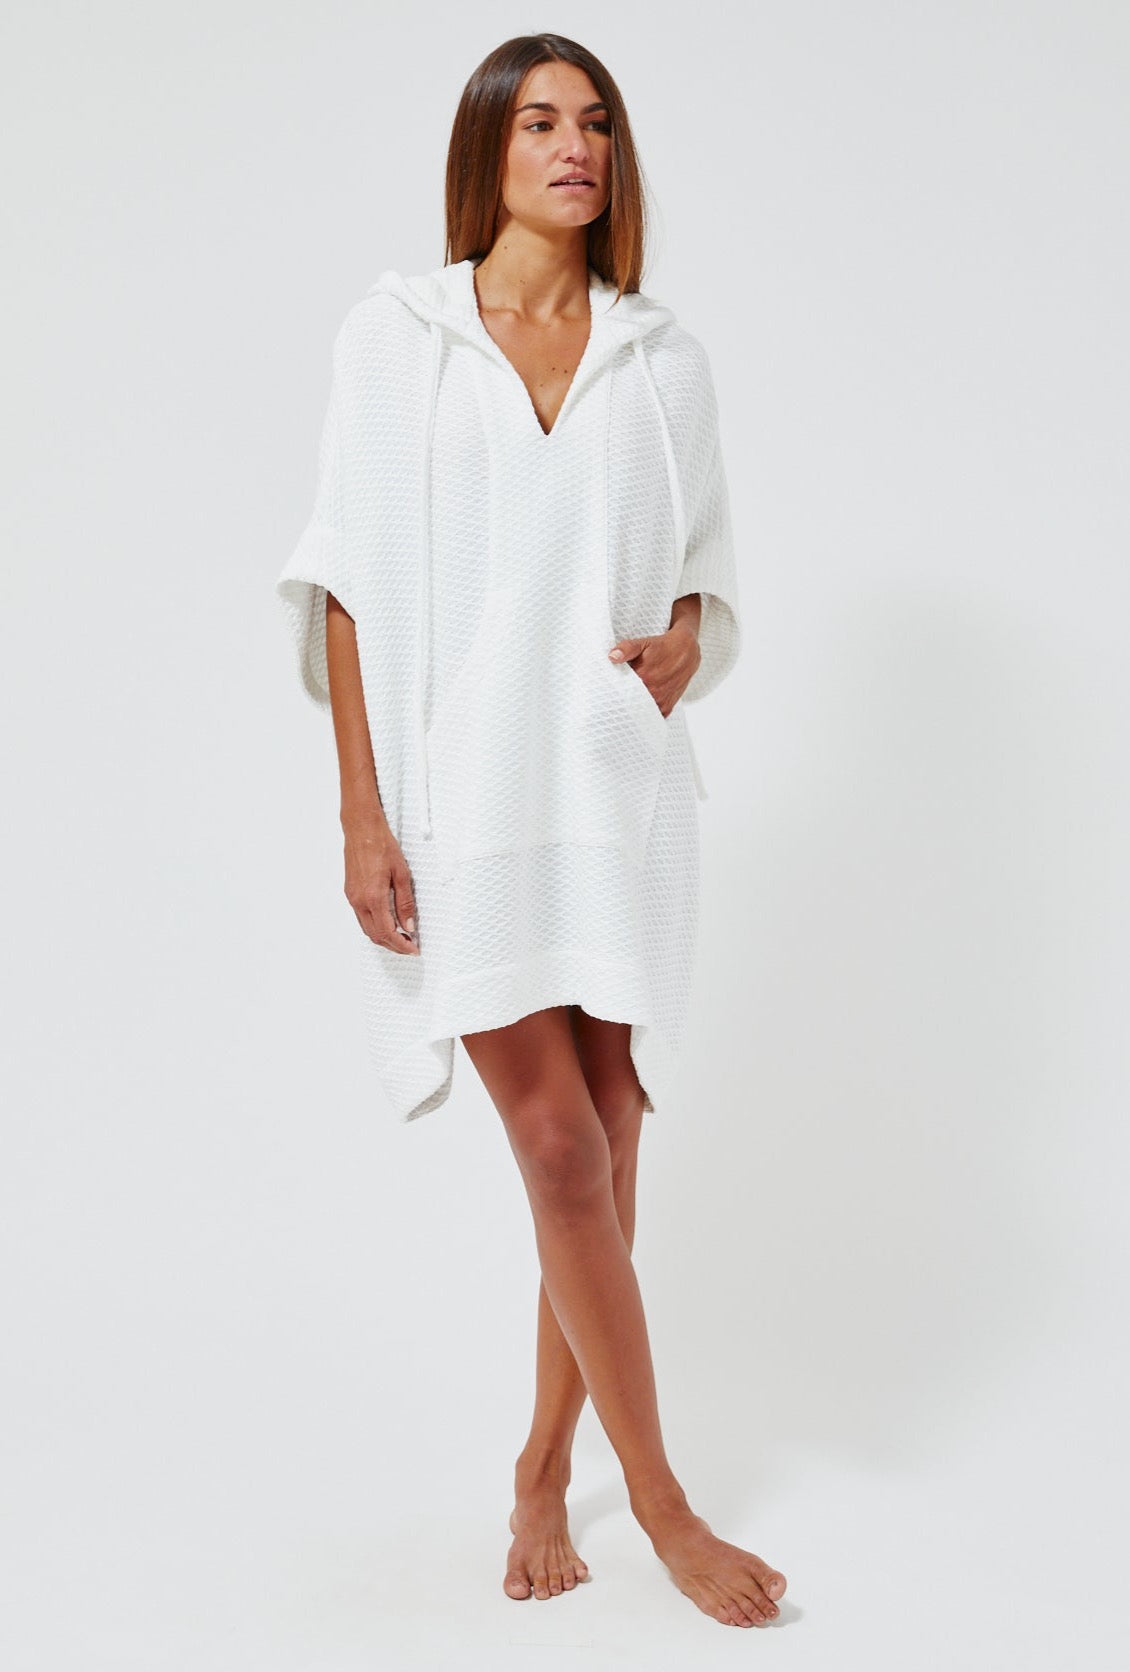 WHITE HONEYCOMB PIQUE HOODED PONCHO